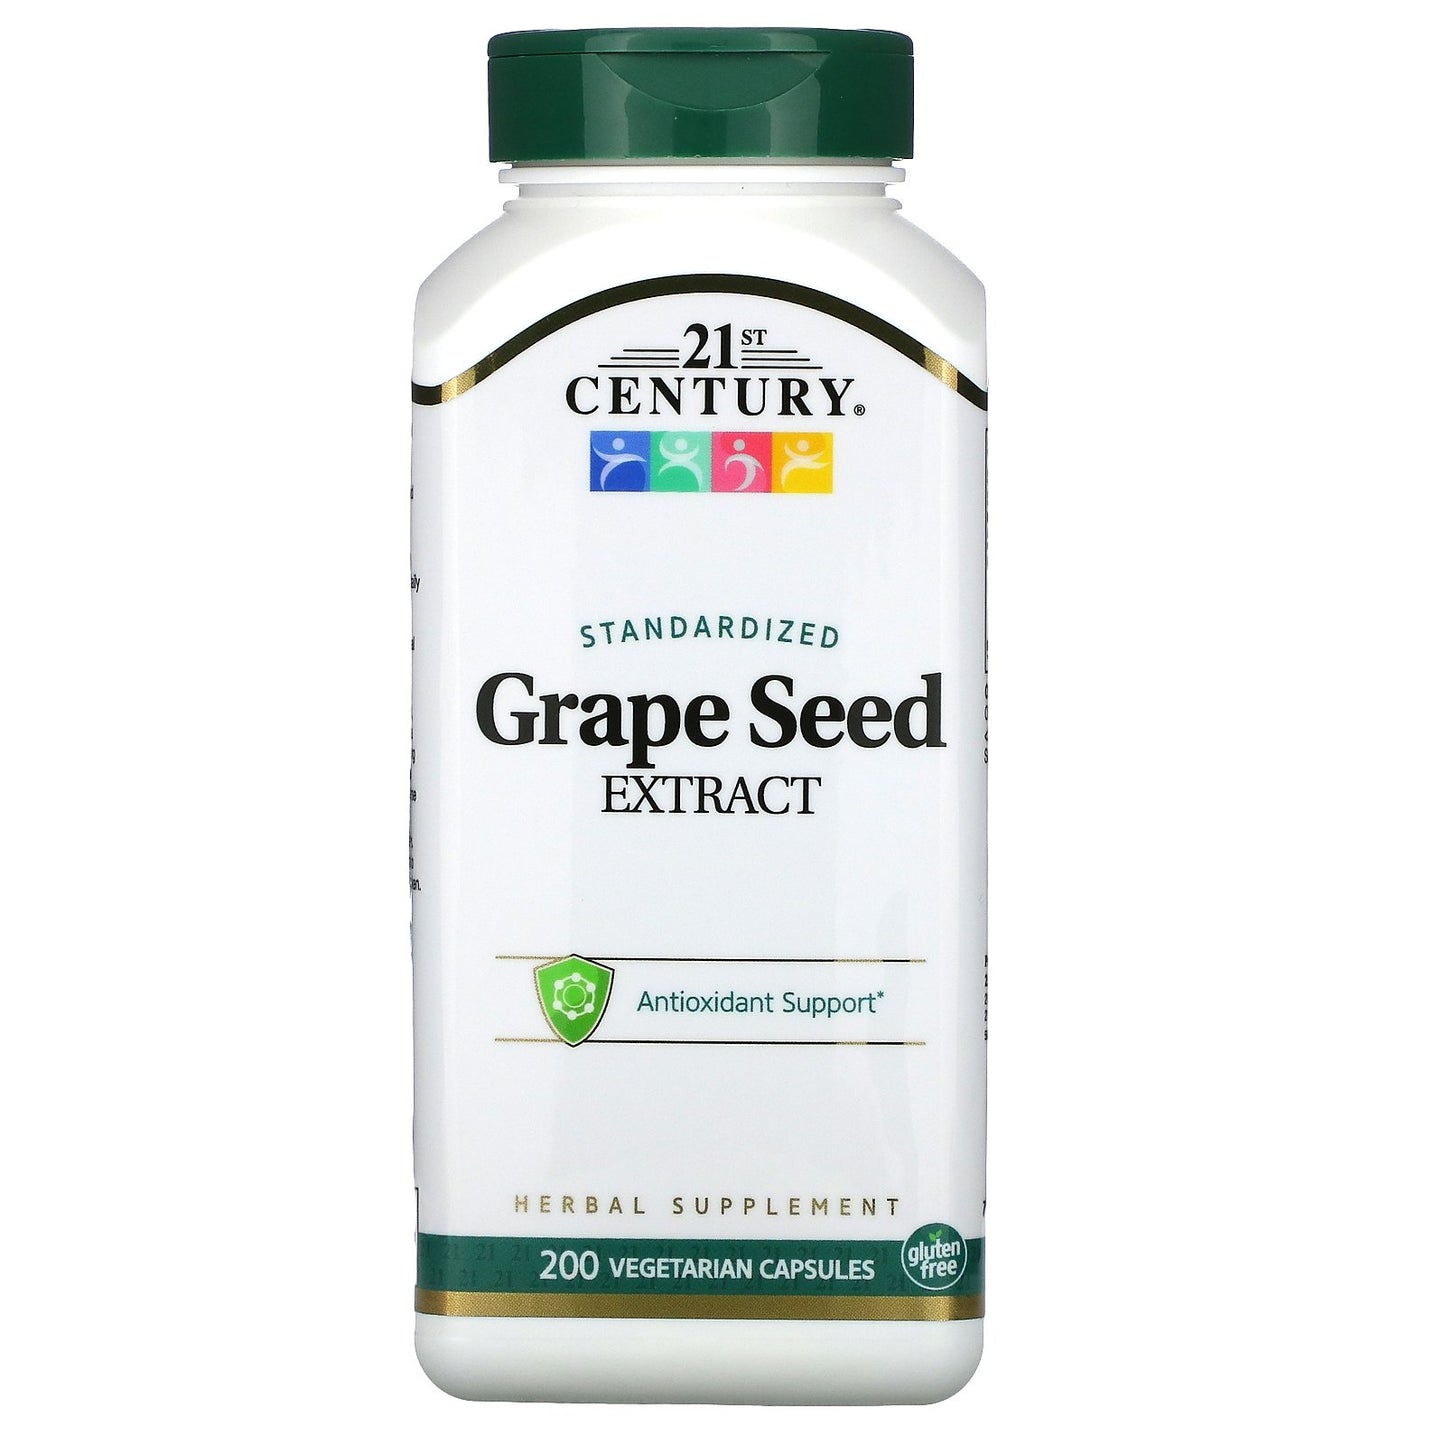 21ST CENTURY GRAPE SEED EXTRACT 100 MG, 200 CAPSULES